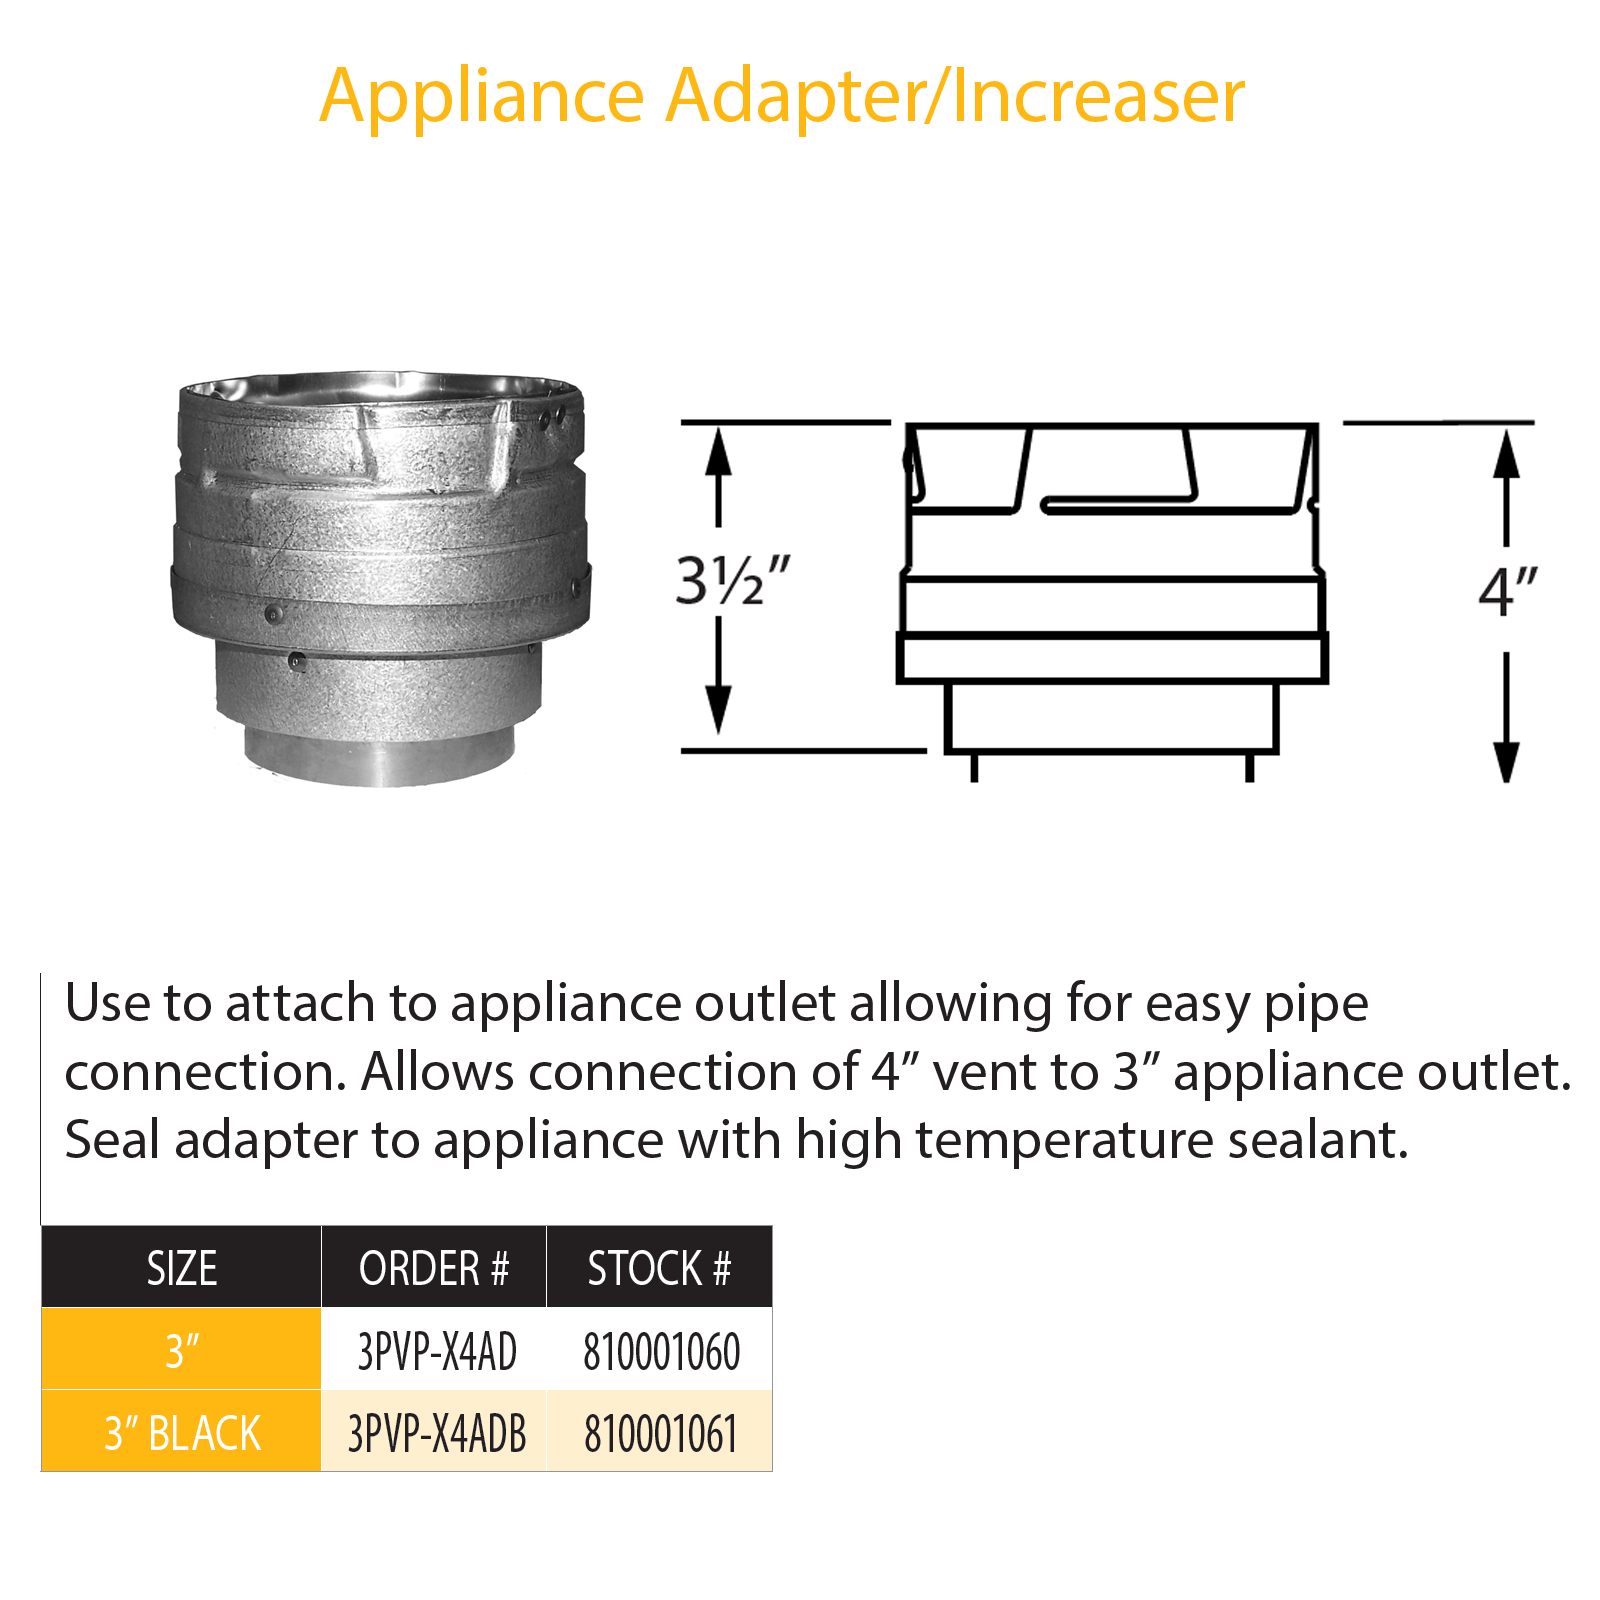 DuraVent PVP Appliance Adapter/Increaser 3" - 4" | 3PVP-X4AD